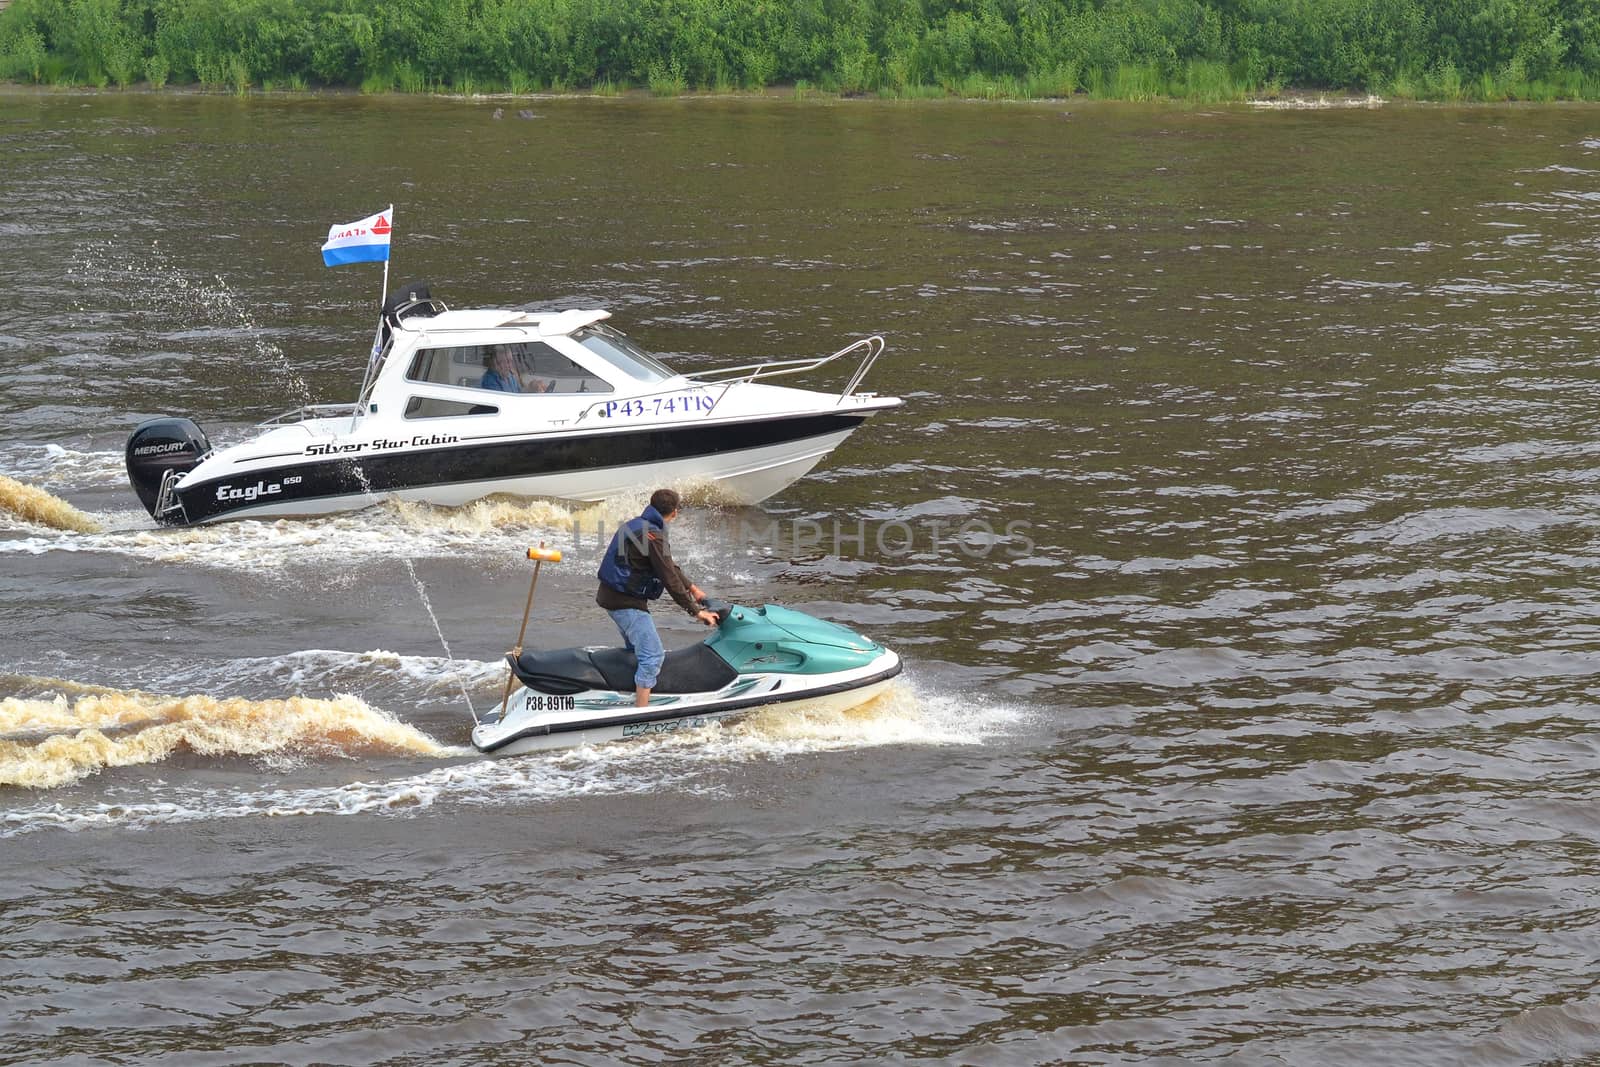 The man on a hydrocycle floats down the river